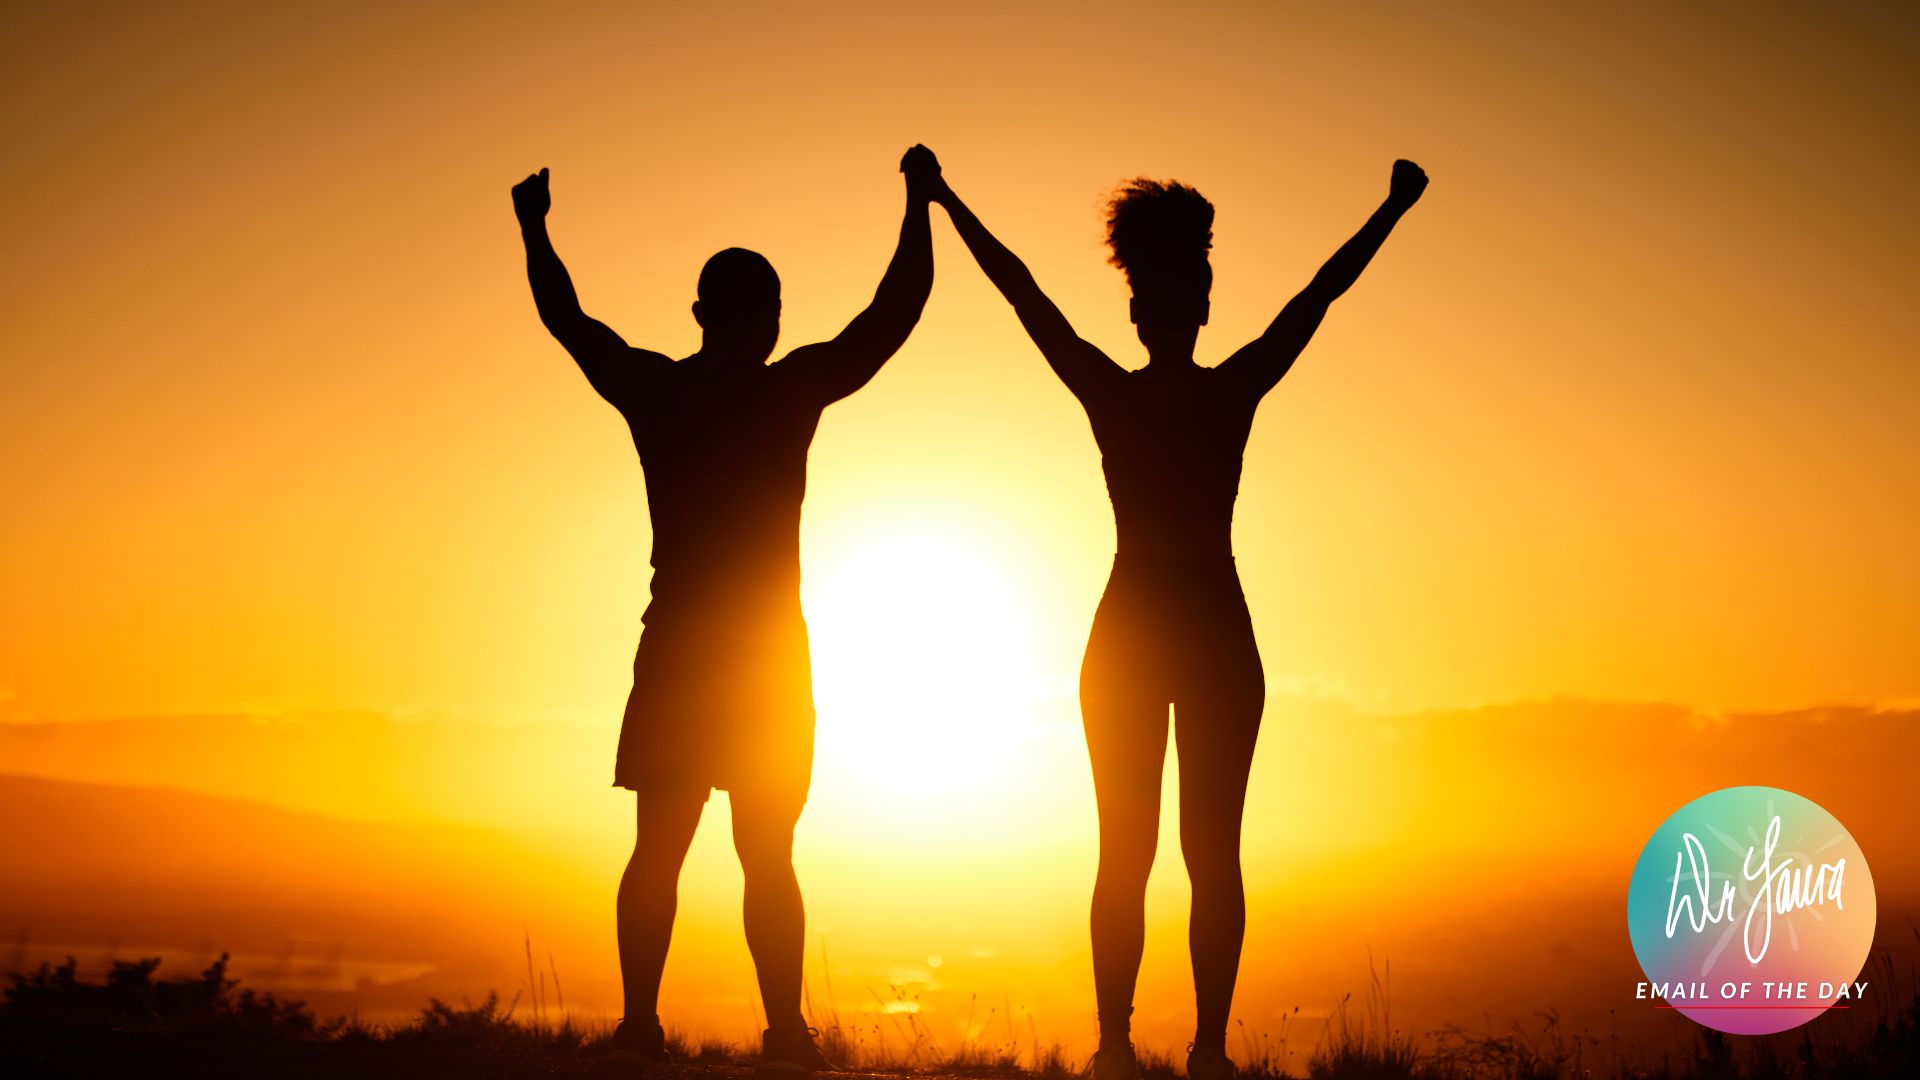 Silhouette of man and woman holding raised hands with sunset background 